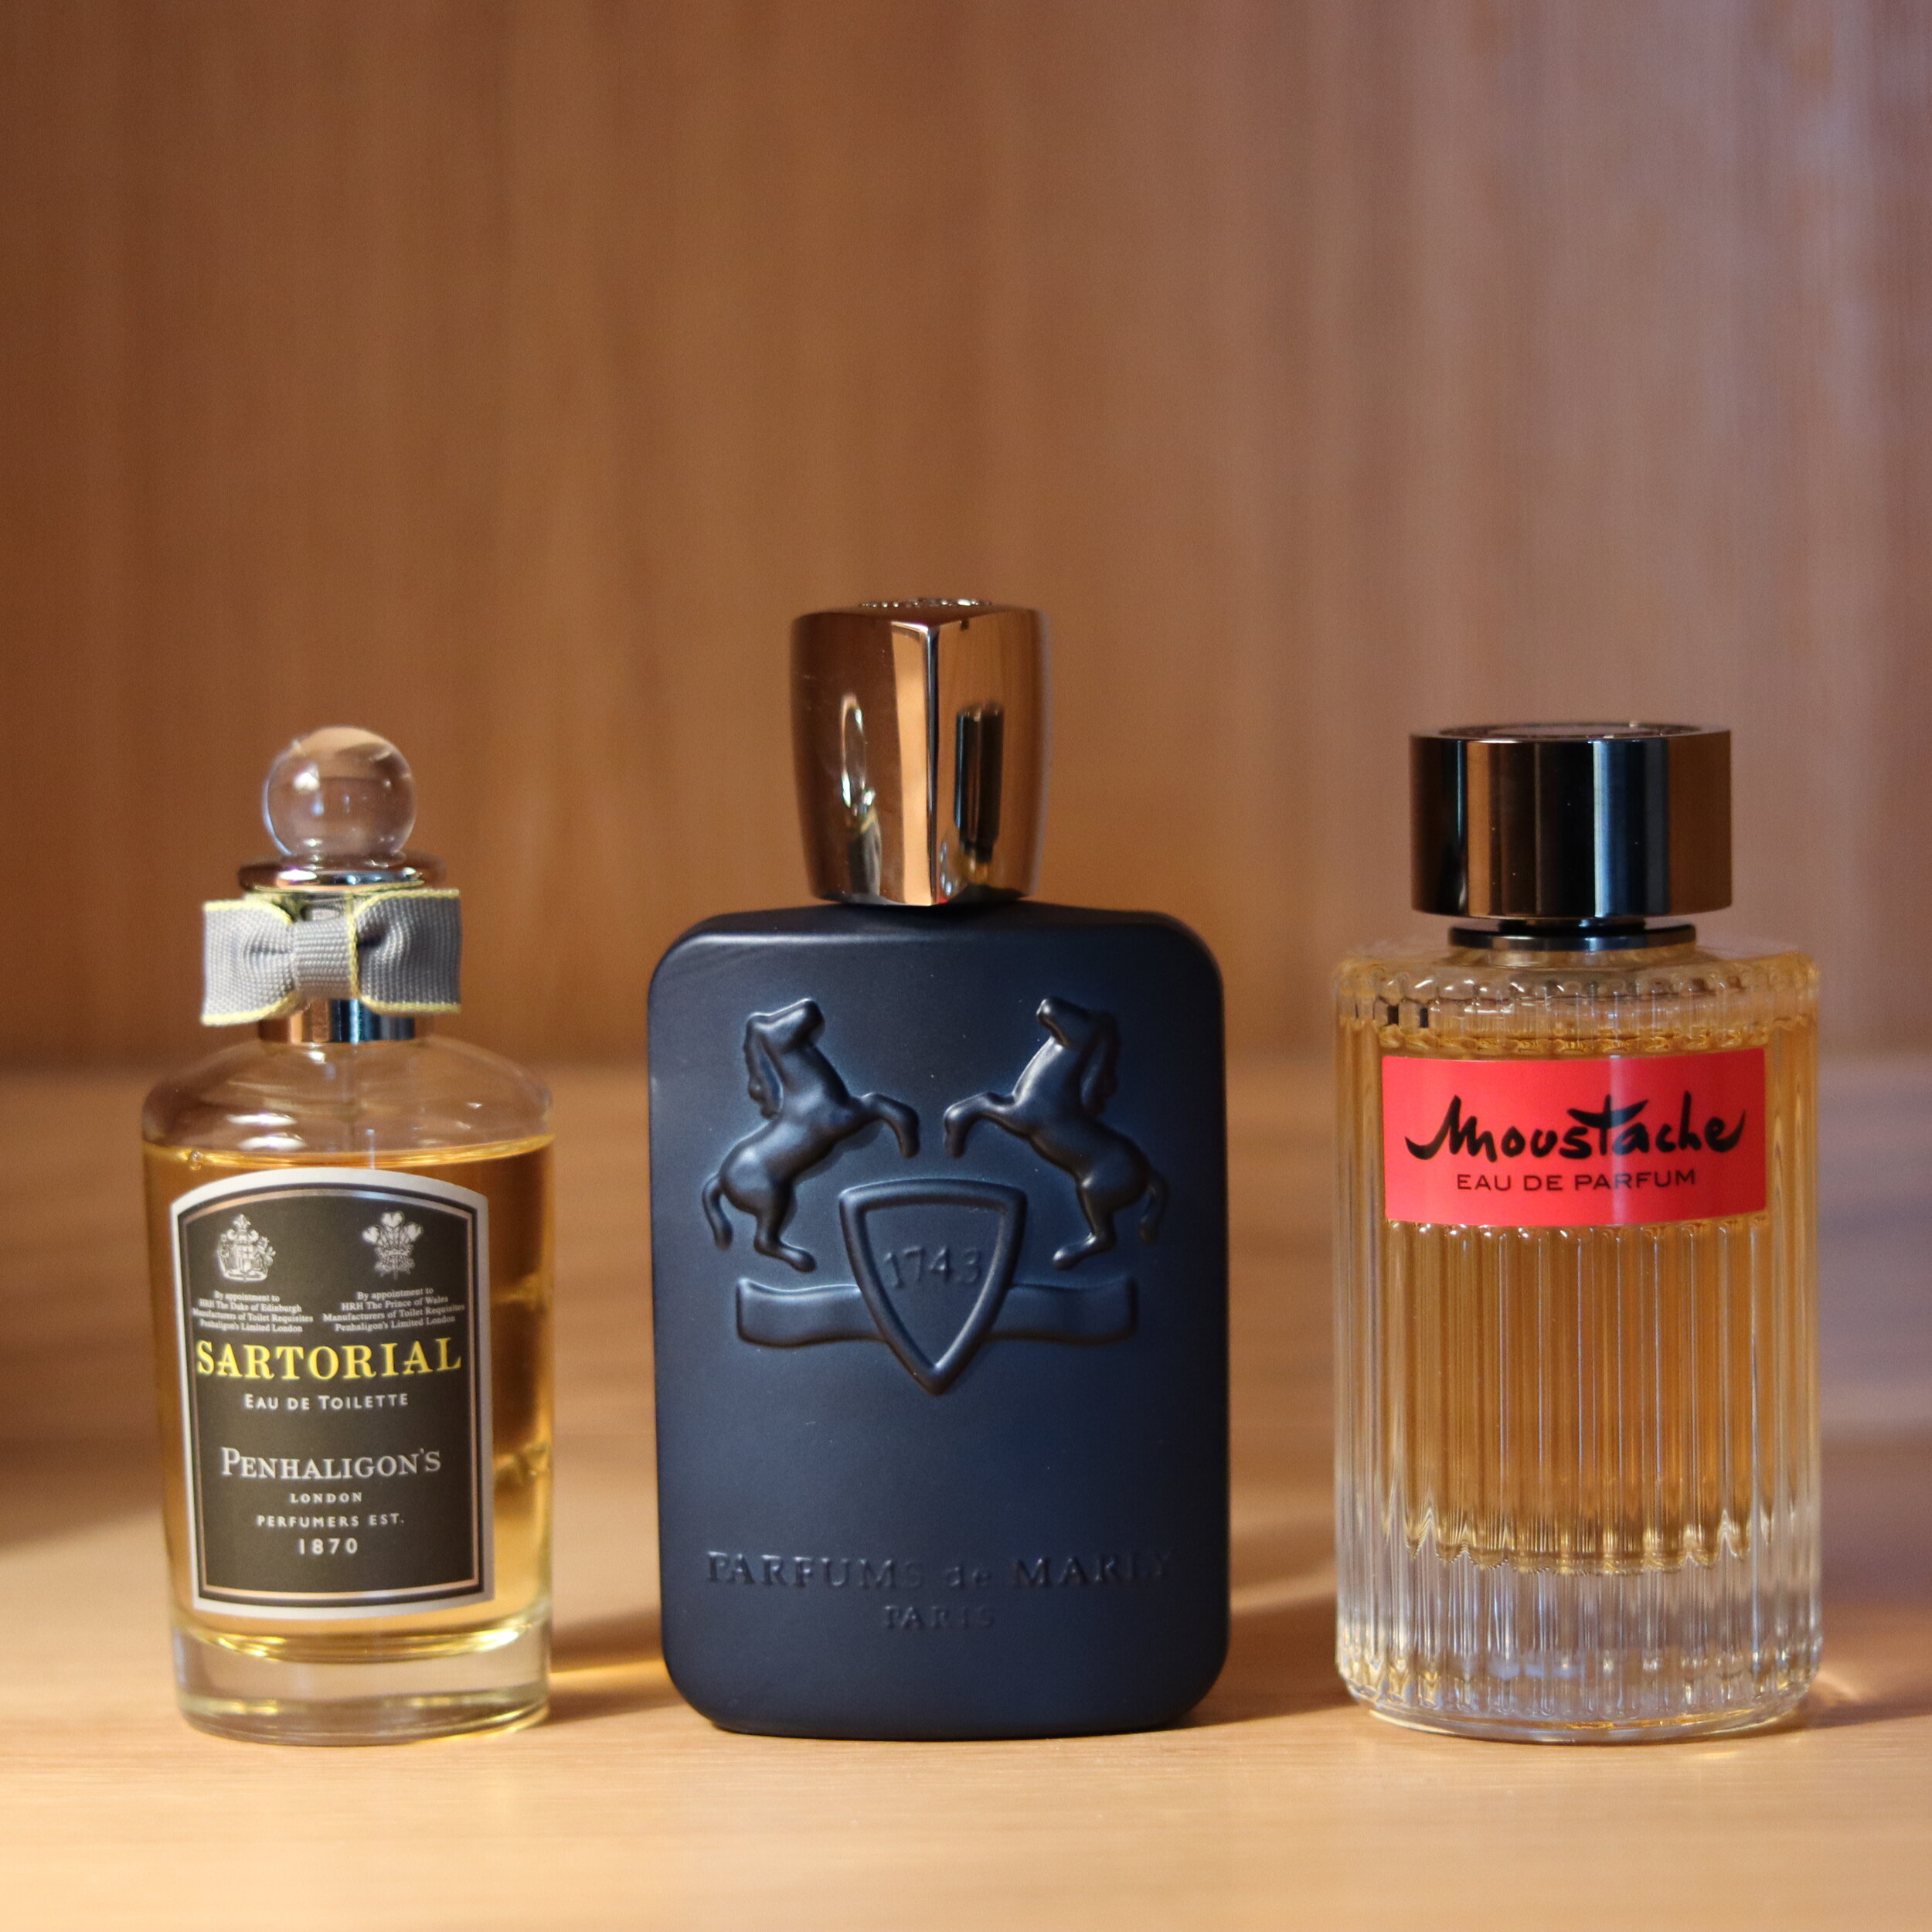 When should you use certain fragrances? — School of Scent